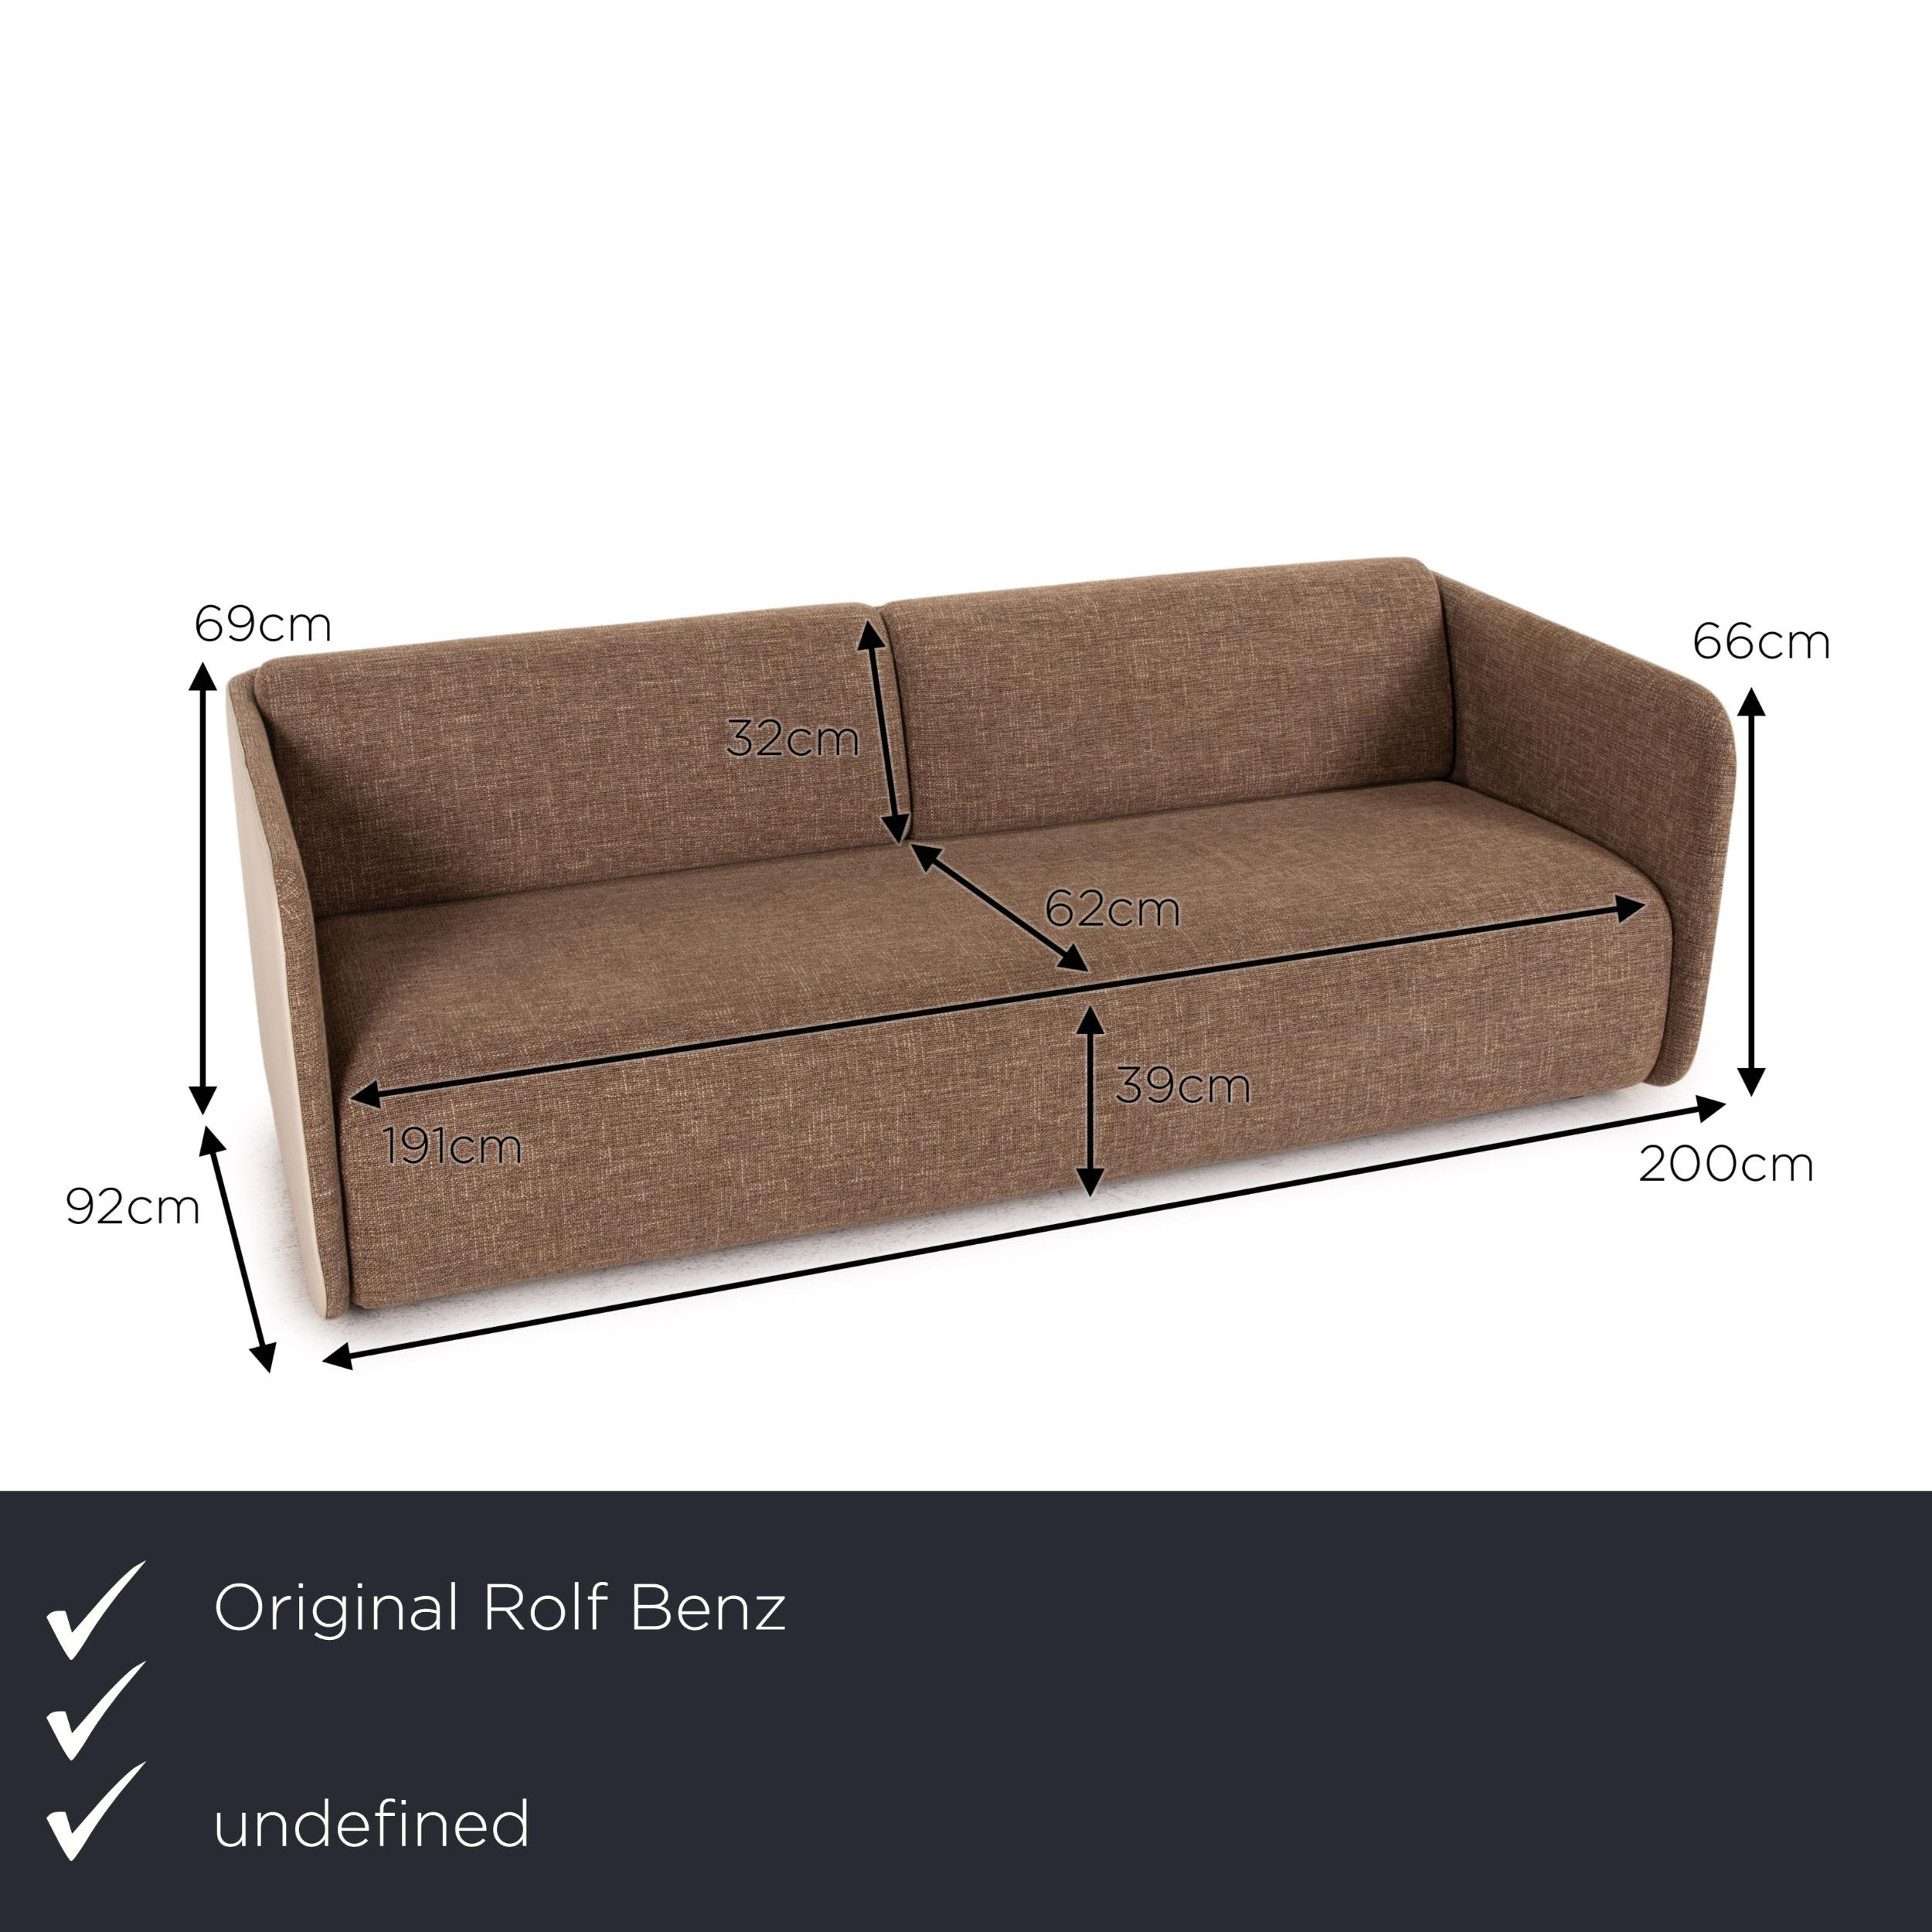 We present to you a Rolf Benz 6900 fabric leather sofa set cream brown function 1 swivel armchair.
 

 Product measurements in centimeters:
 

Depth: 92
Width: 200
Height: 69
Seat height: 39
Rest height: 66
Seat depth: 62
Seat width: